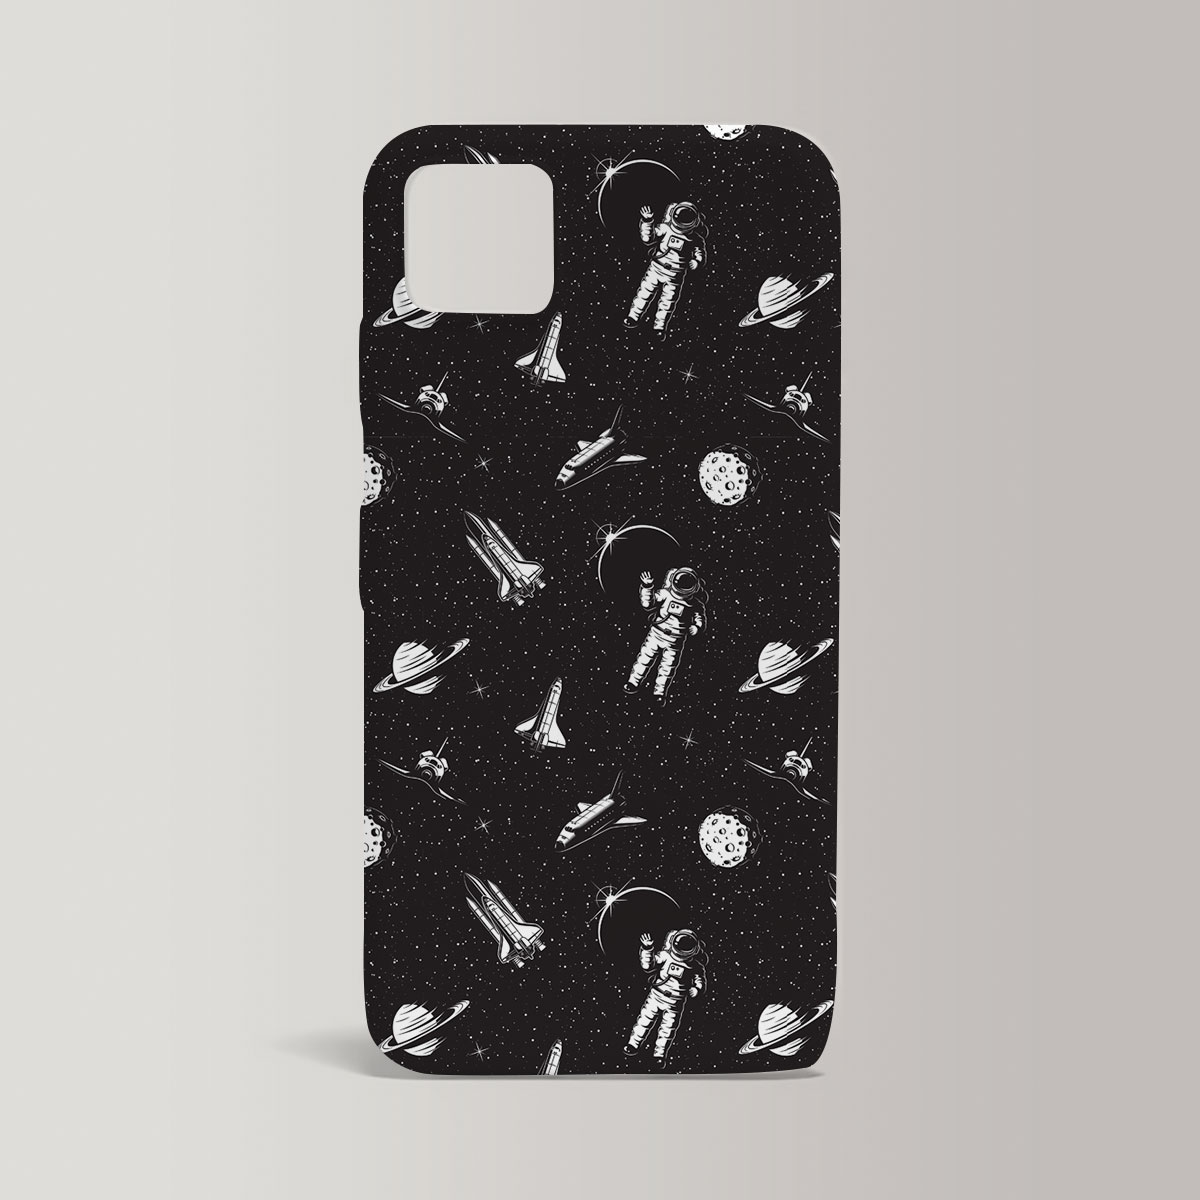 3D Black And White Astronaut Iphone Case